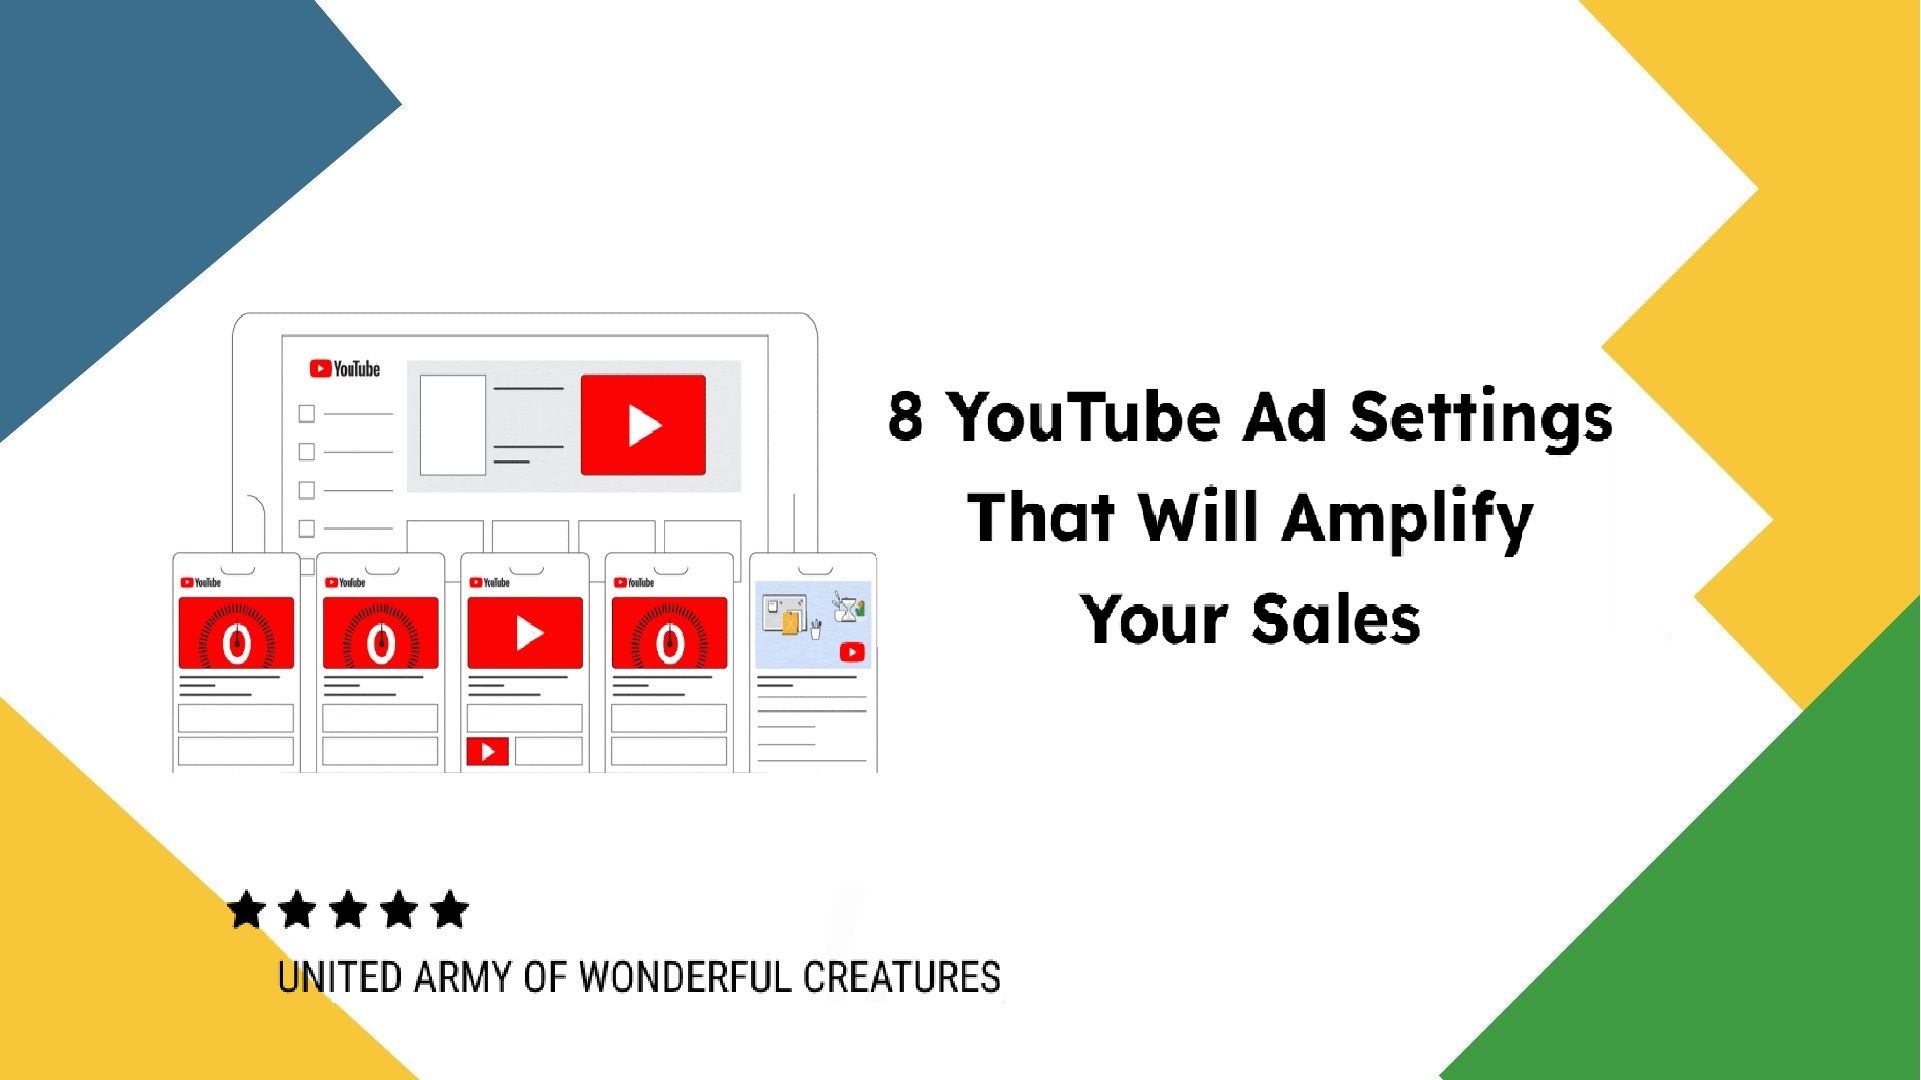 8 YouTube Ad Settings That Will Amplify Your Sales